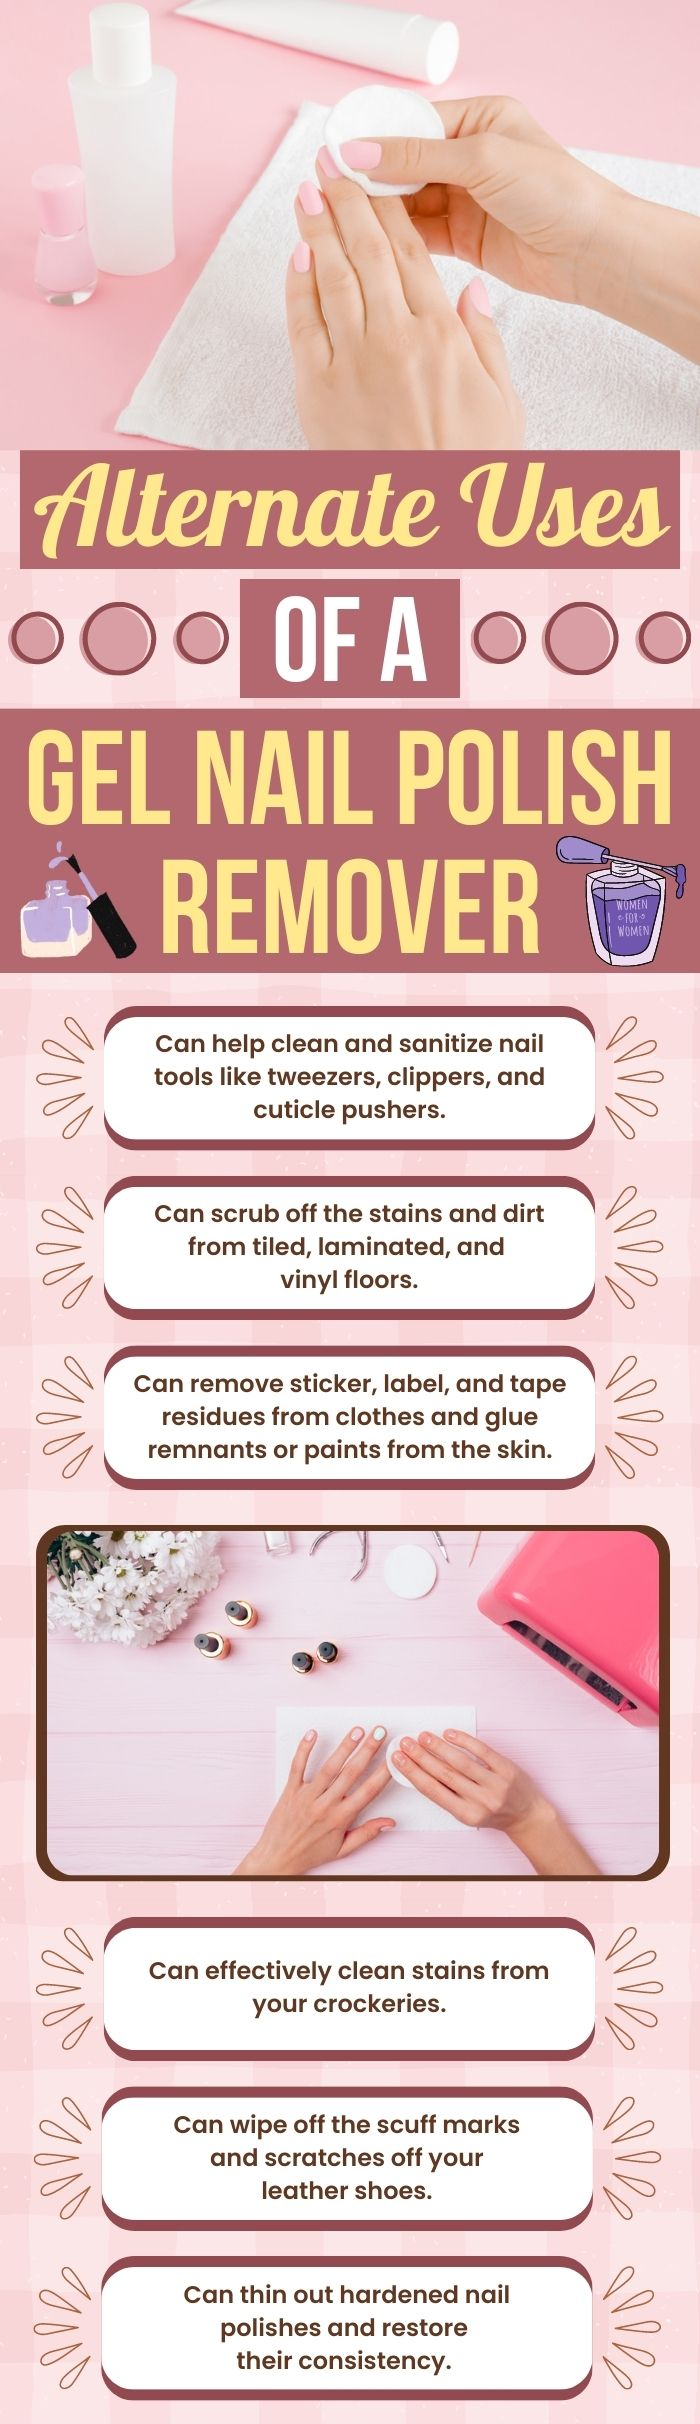 Exchange uses Of A Gel Nail Polish Remover 